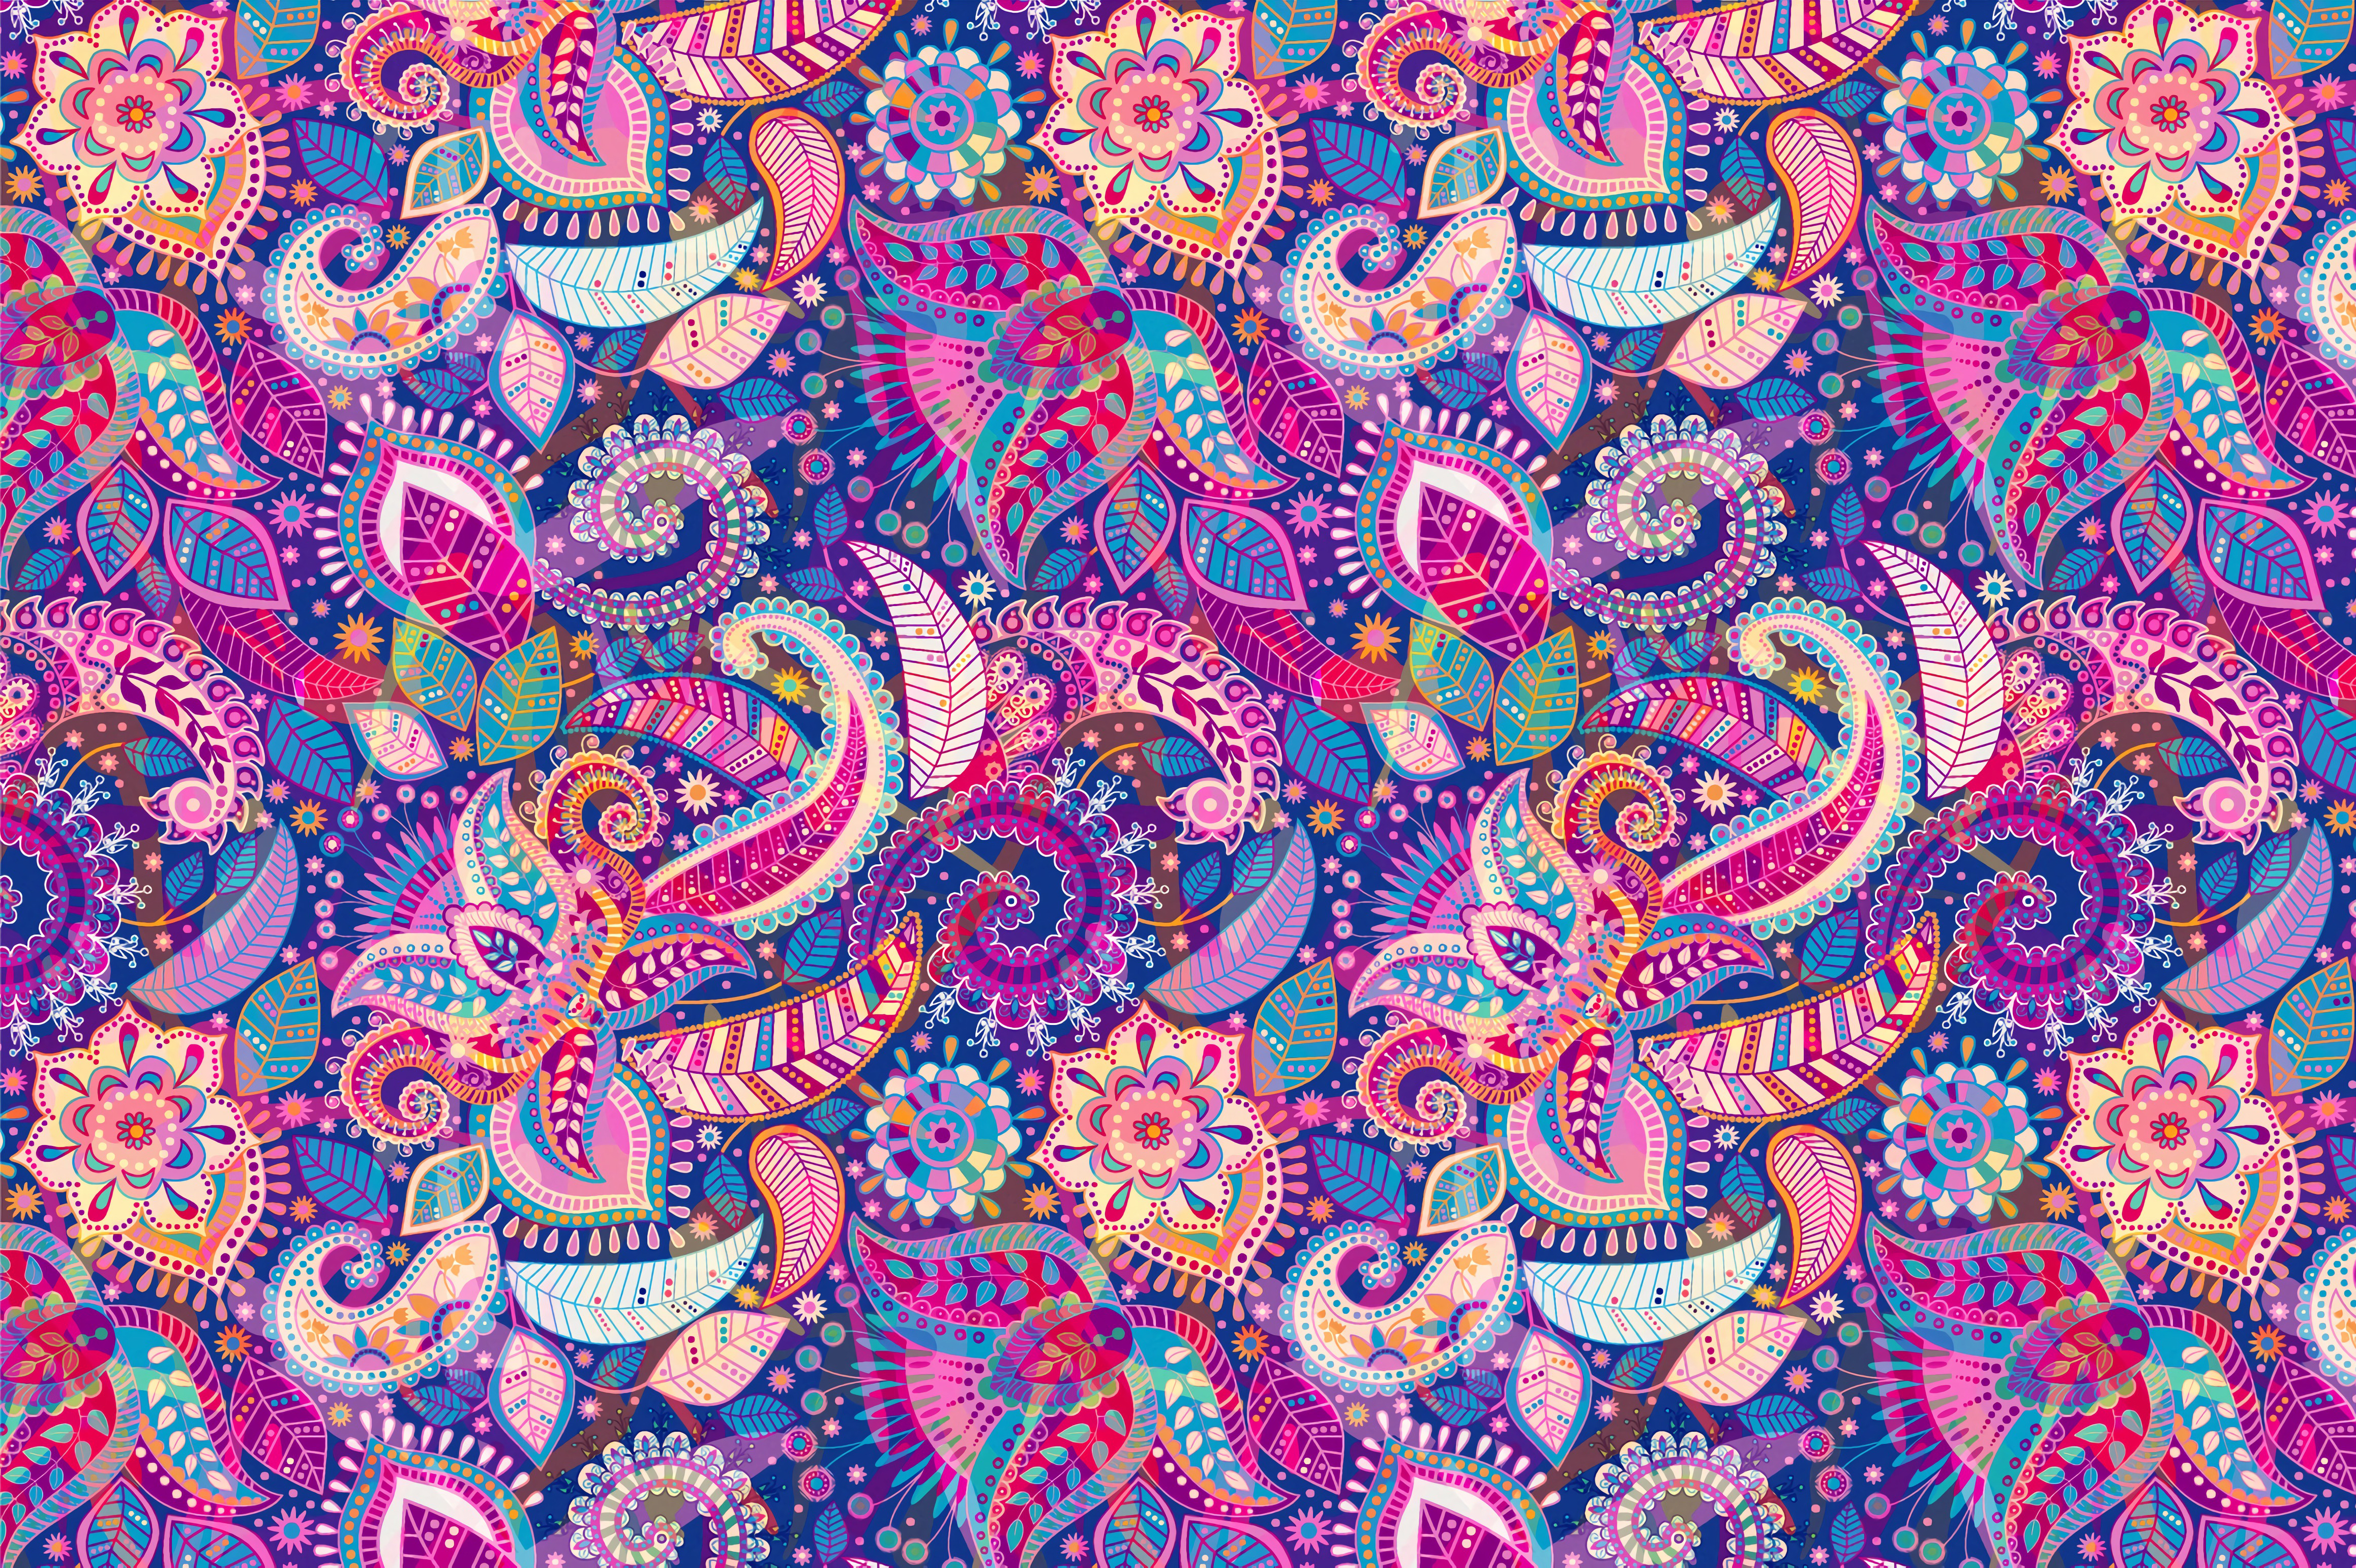 wallpapers motley, art, flowers, multicolored, pattern, texture, textures, ornament